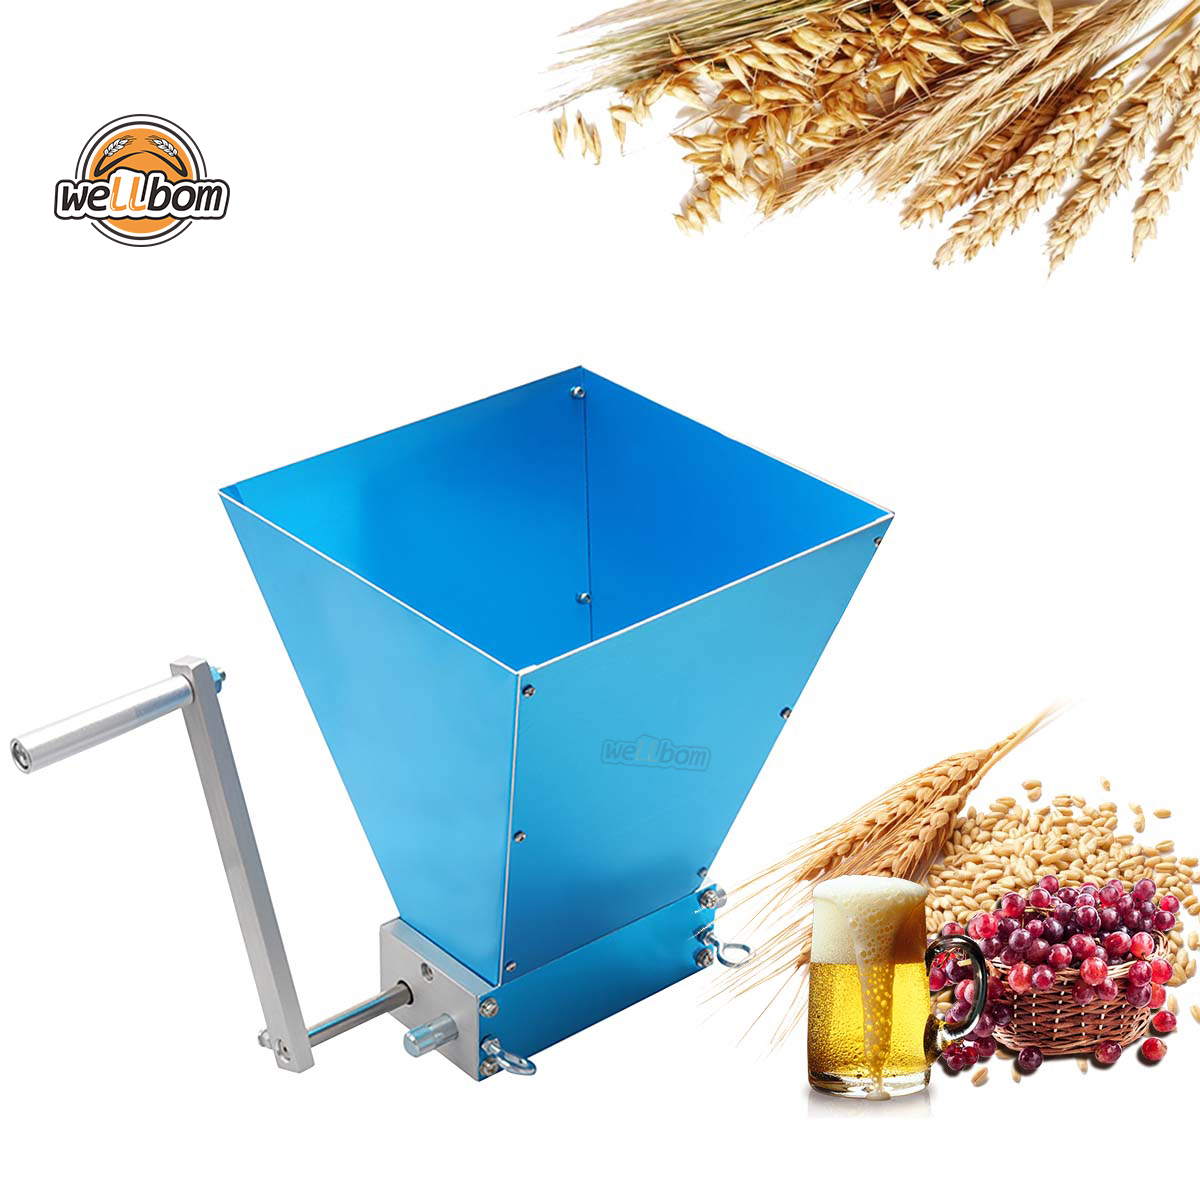 2018 New Stainless Steel 2 Rollers Homebrew Barley Grinder Crusher Malt Grain Mill for Home Beer brewing Top Quality,Tumi - The official and most comprehensive assortment of travel, business, handbags, wallets and more.